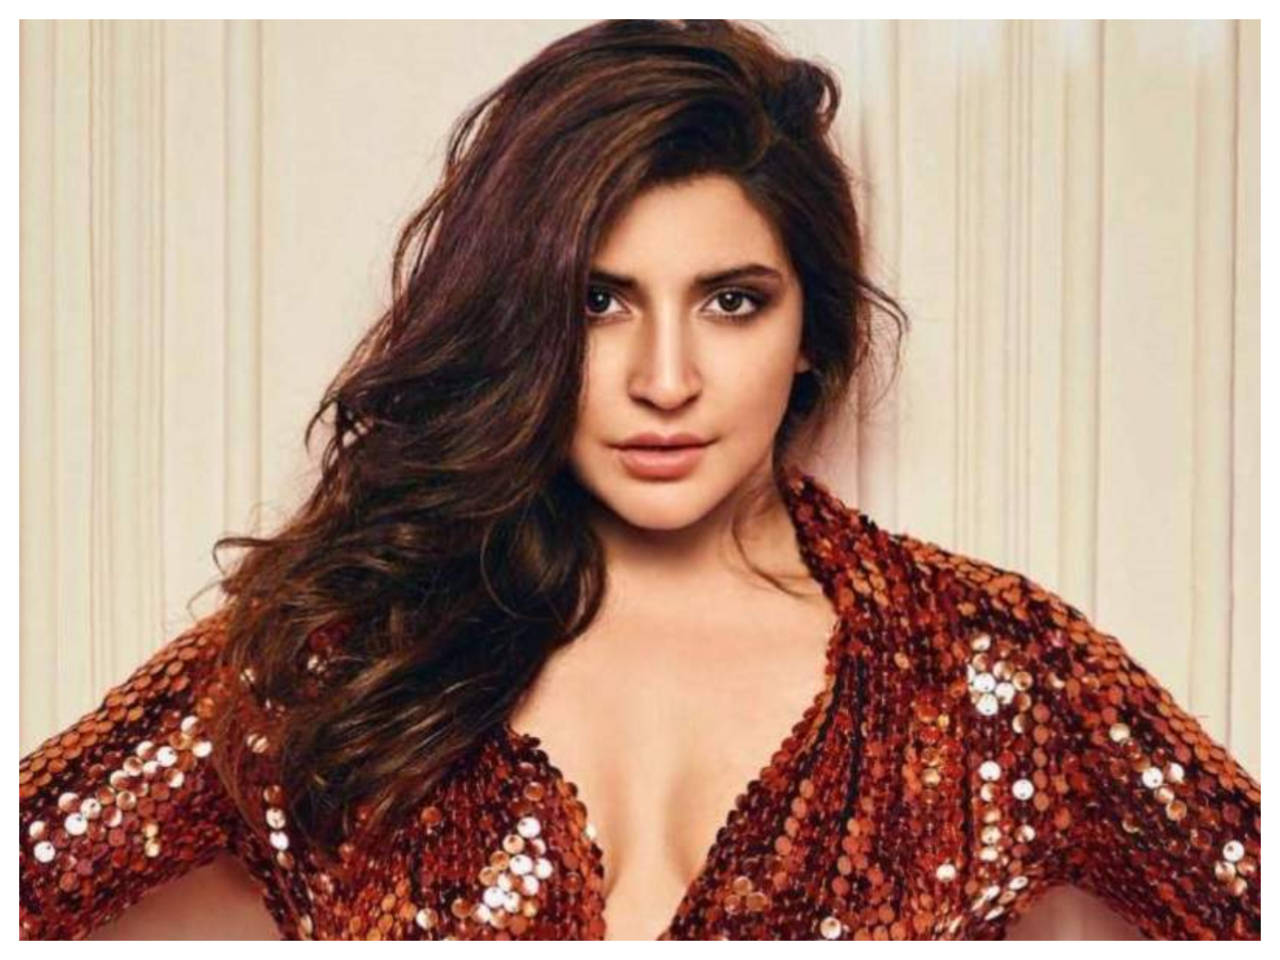 Anushka Sharma opened up about getting rejected at the age of 15 based on her looks, called it "mentally damaging" | - Times of India